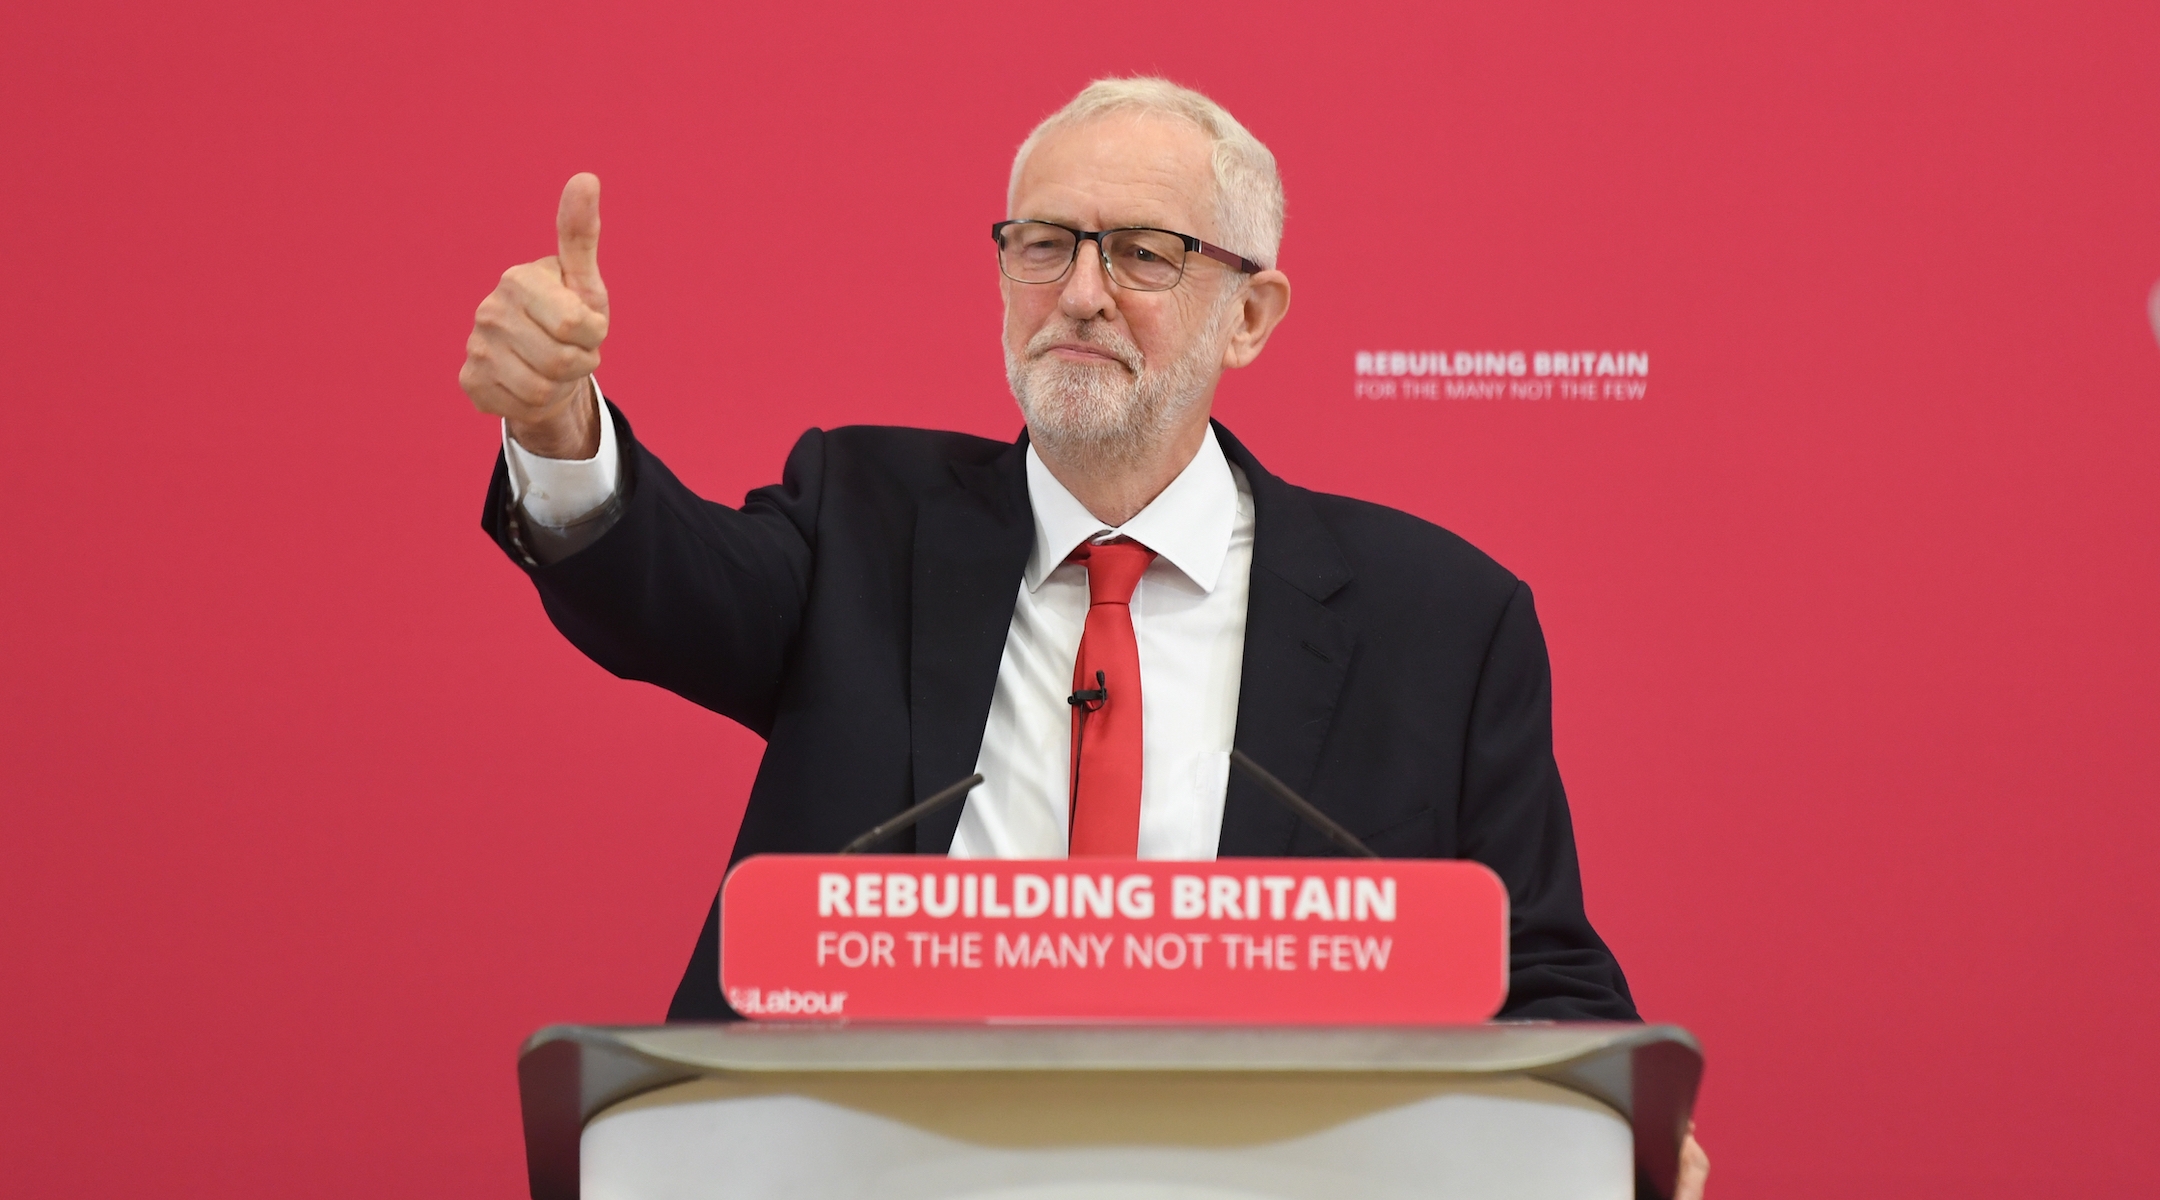 Labour leader Jeremy Corbyn, shown making a speech during a visit to Pen Green Children's Centre in Corby, England, Aug. 19, 2019, has been accused of allowing anti-Semitism in his party. (Joe Giddens/PA Images via Getty Images)